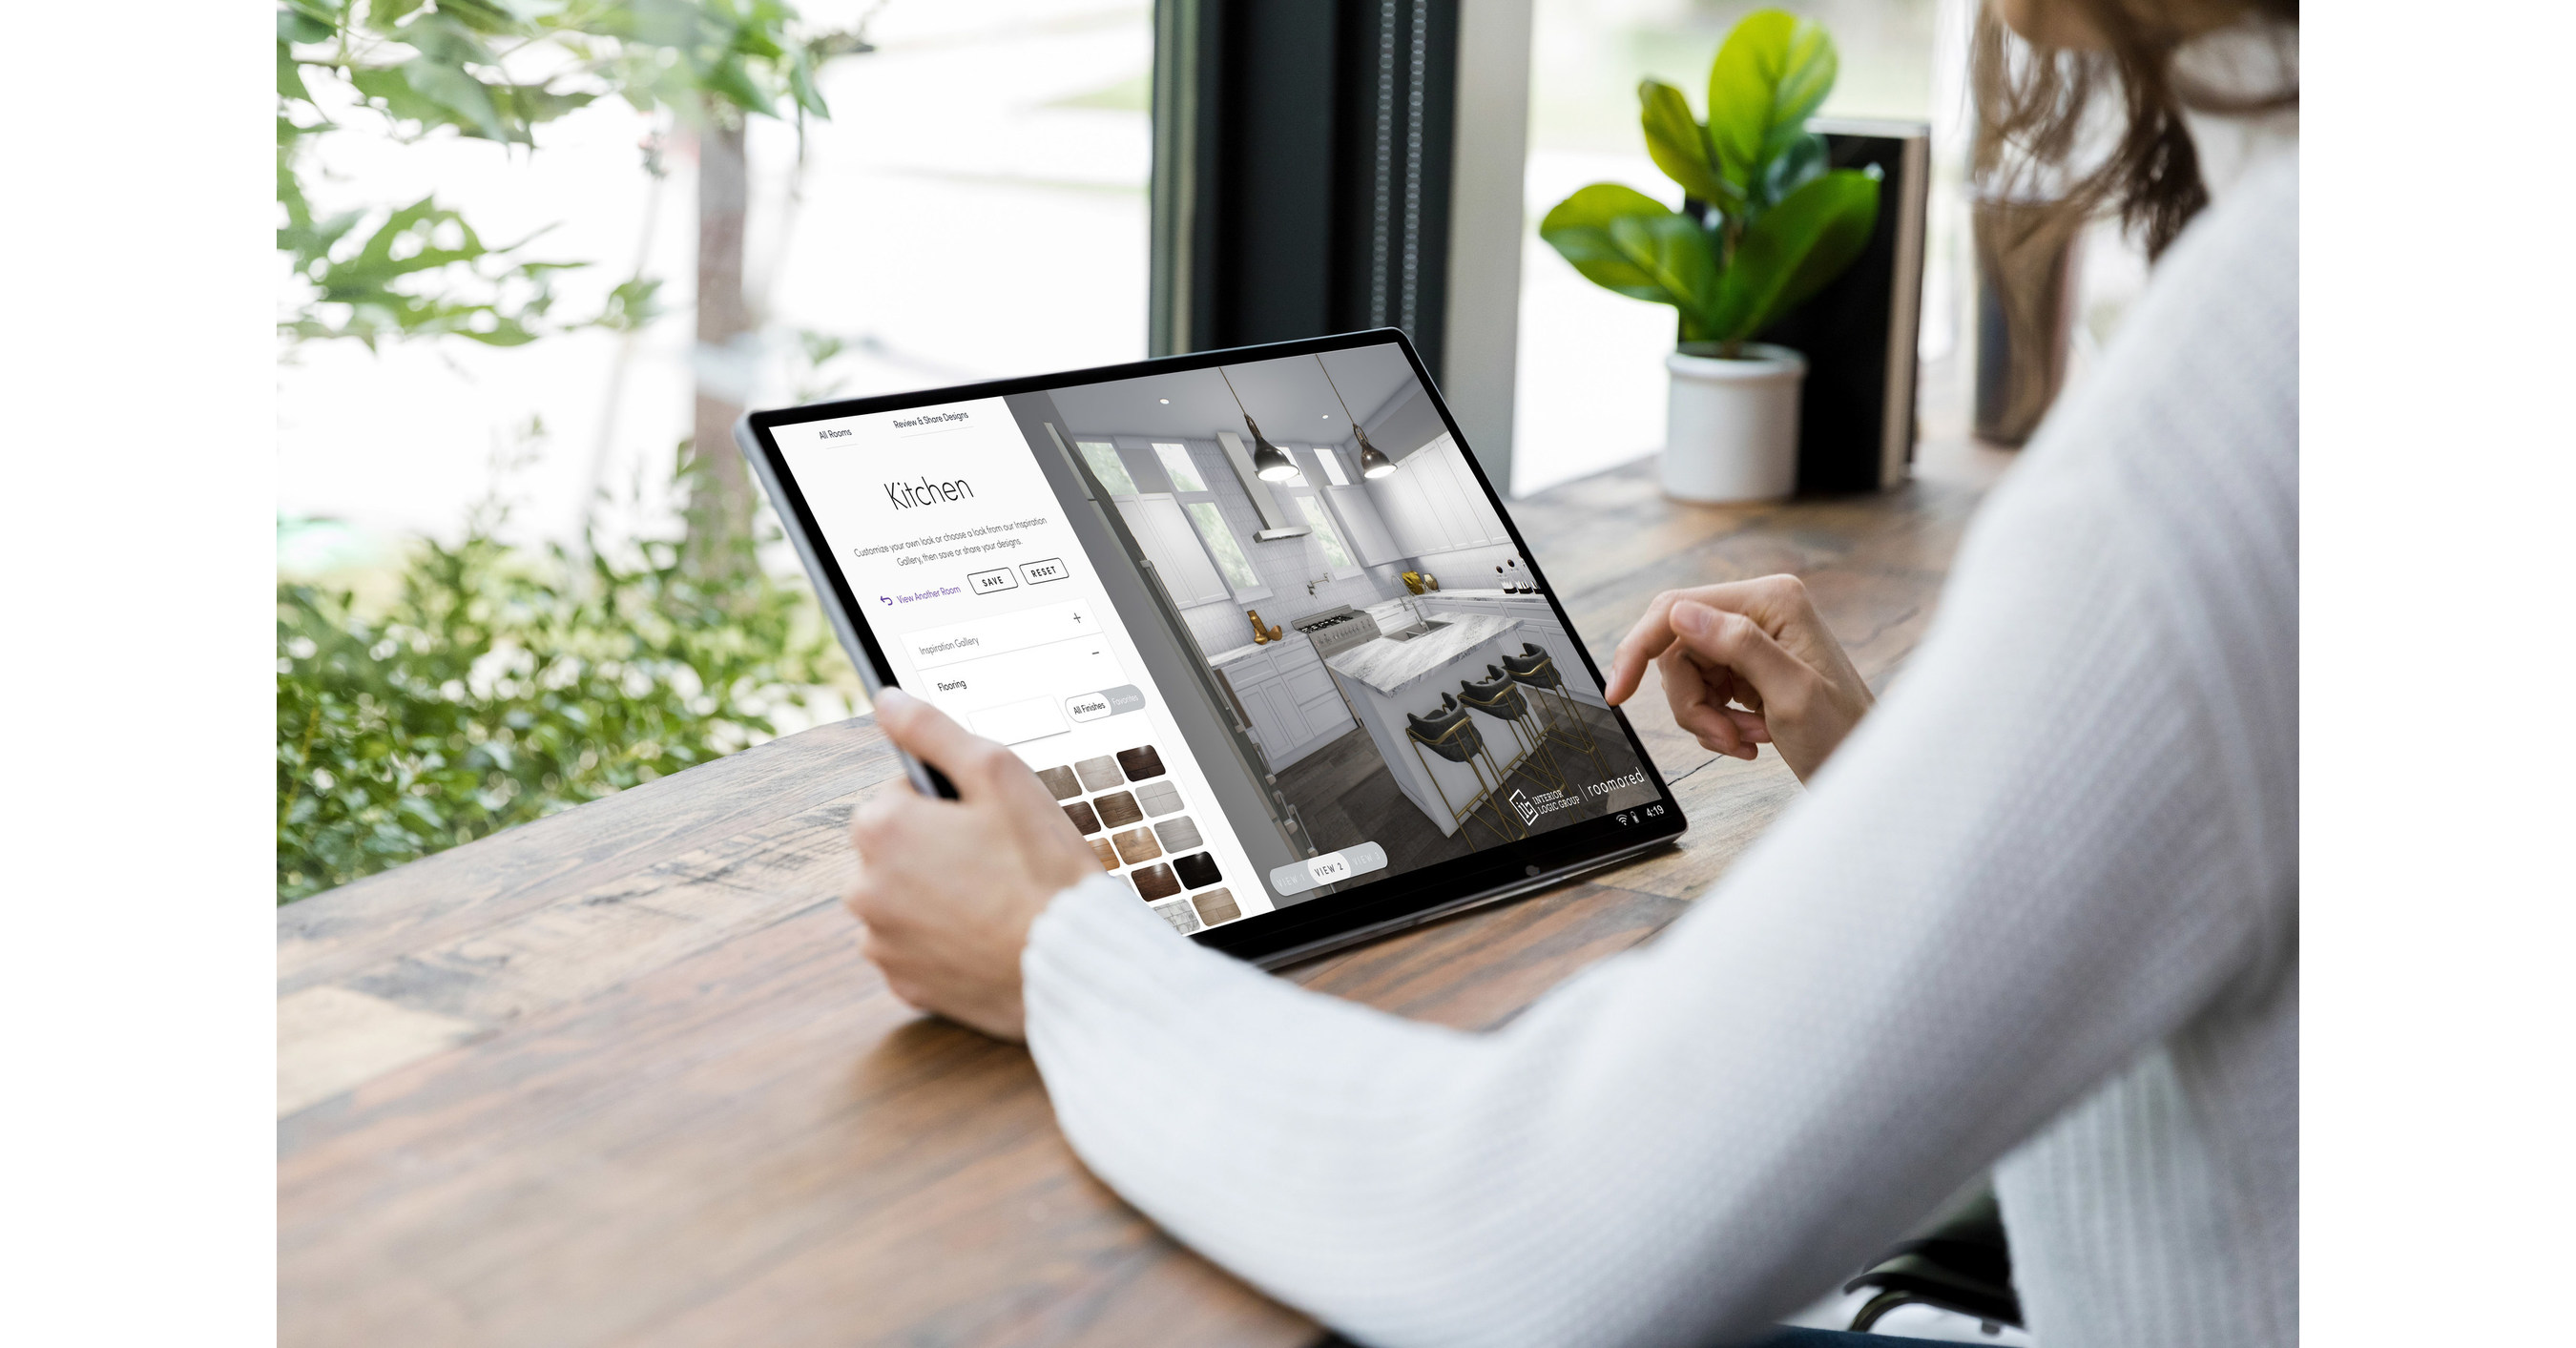 With Investment from Interior Logic Group, Roomored Solidifies Position as Nation’s Premier Virtual Home Design Solution